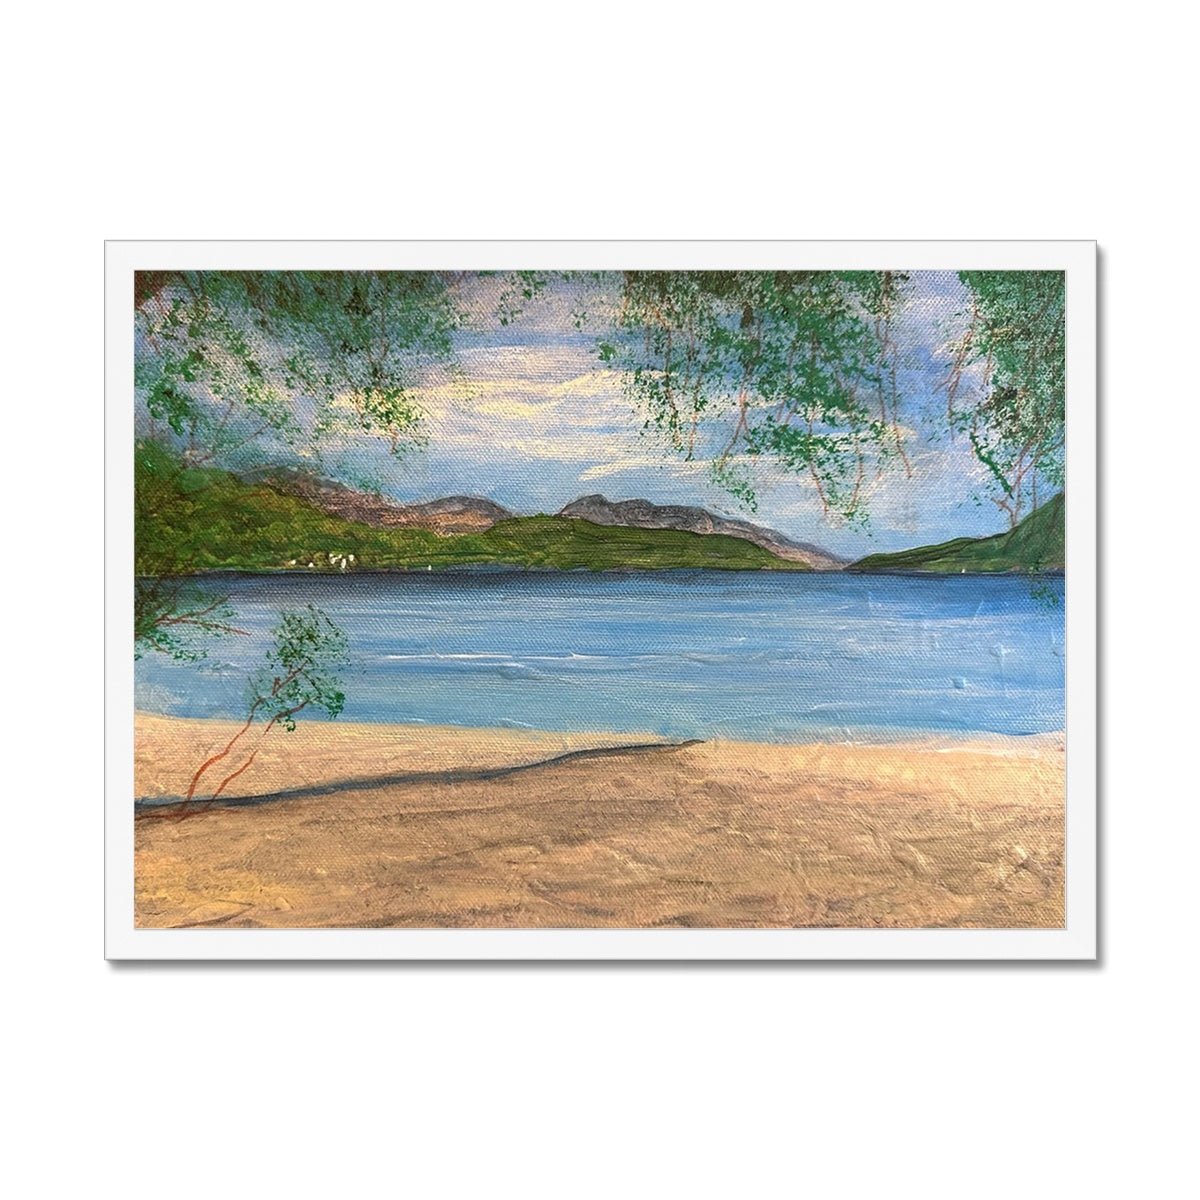 Firkin Point Loch Lomond Painting | Framed Prints From Scotland-Framed Prints-Scottish Lochs & Mountains Art Gallery-A2 Landscape-White Frame-Paintings, Prints, Homeware, Art Gifts From Scotland By Scottish Artist Kevin Hunter